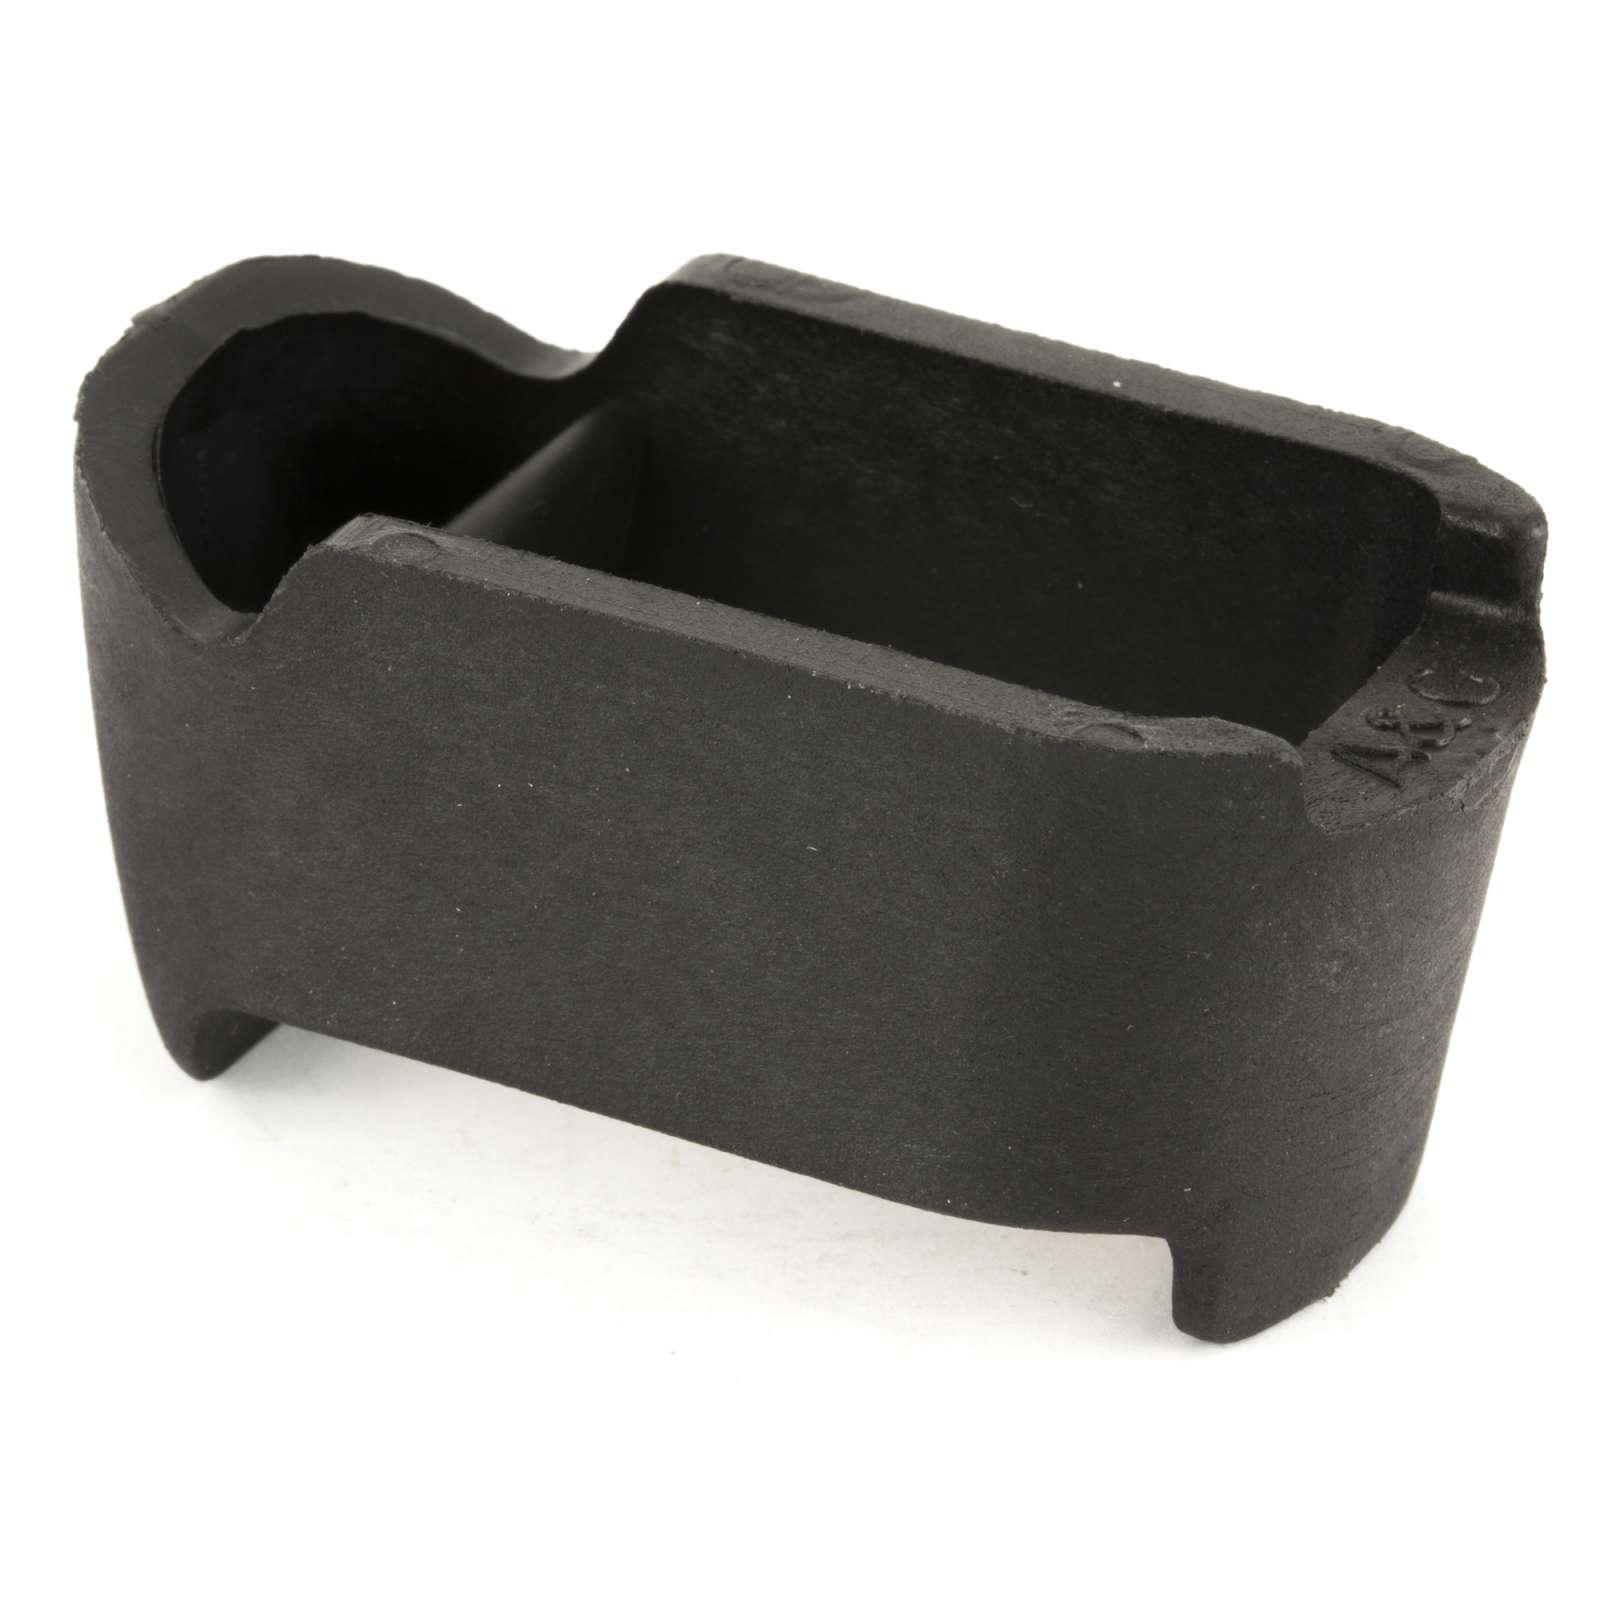 Glock 22 Magazine Sleeve for Glock 27 Compact by SsgtStretch